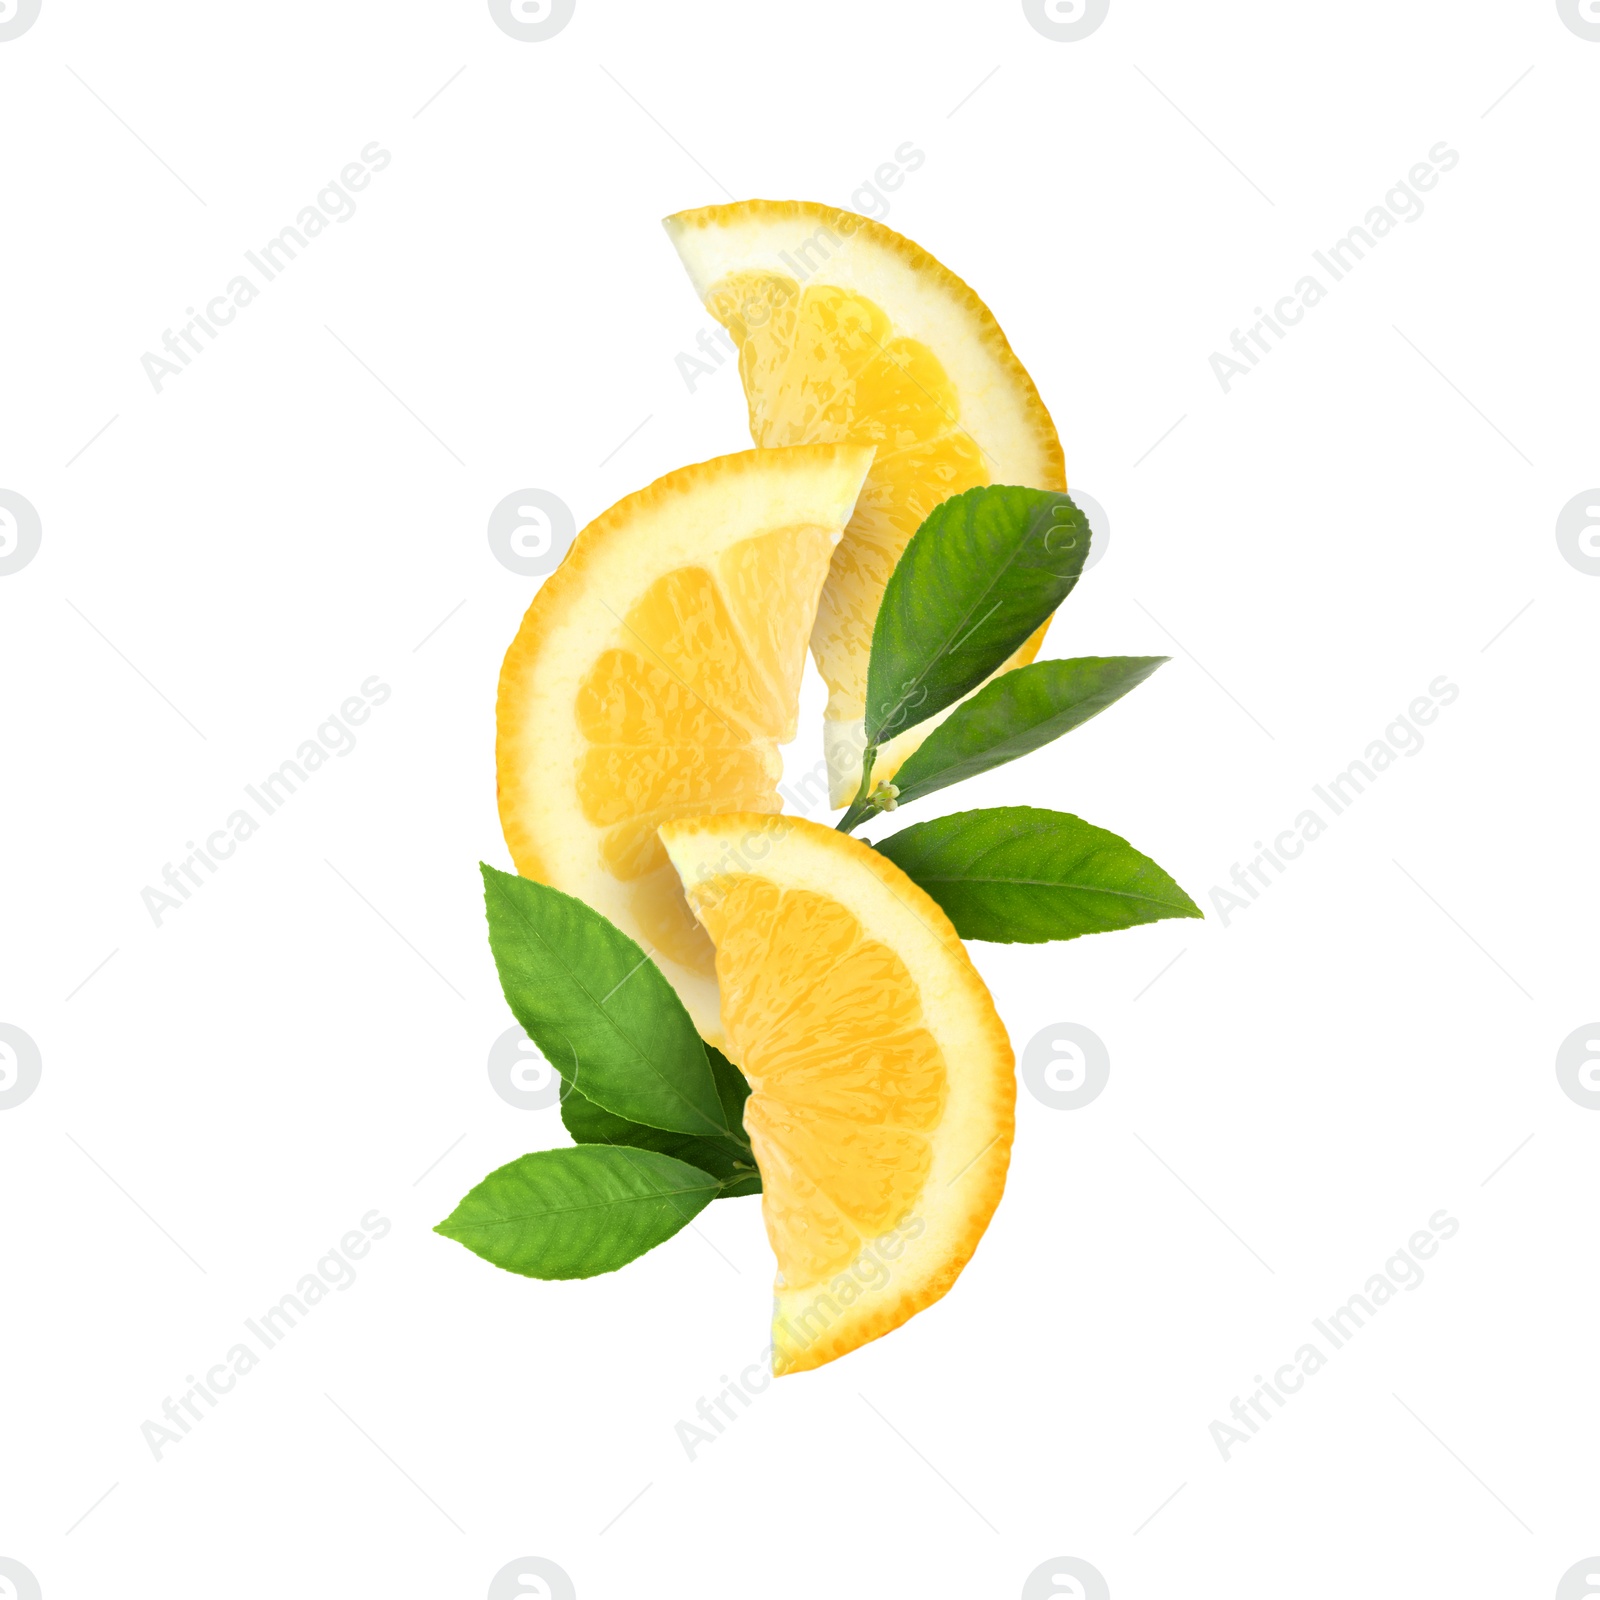 Image of Cut fresh lemon with green leaves isolated on white